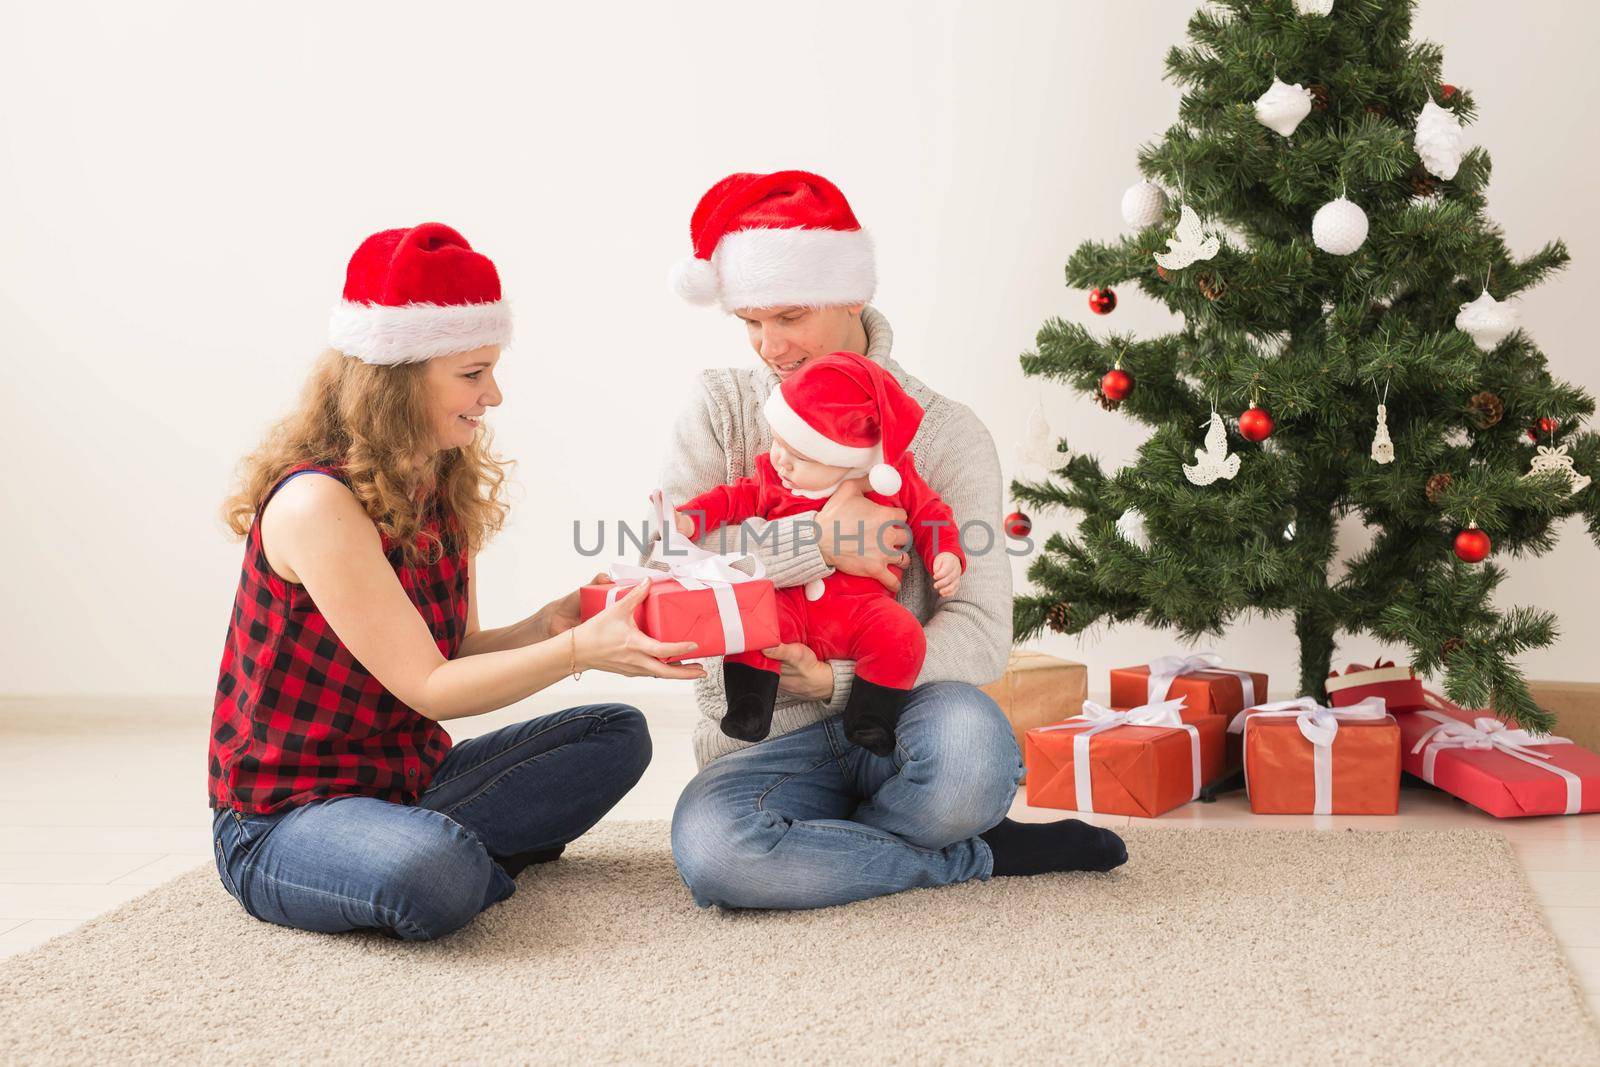 Happy couple with baby celebrating Christmas together at home